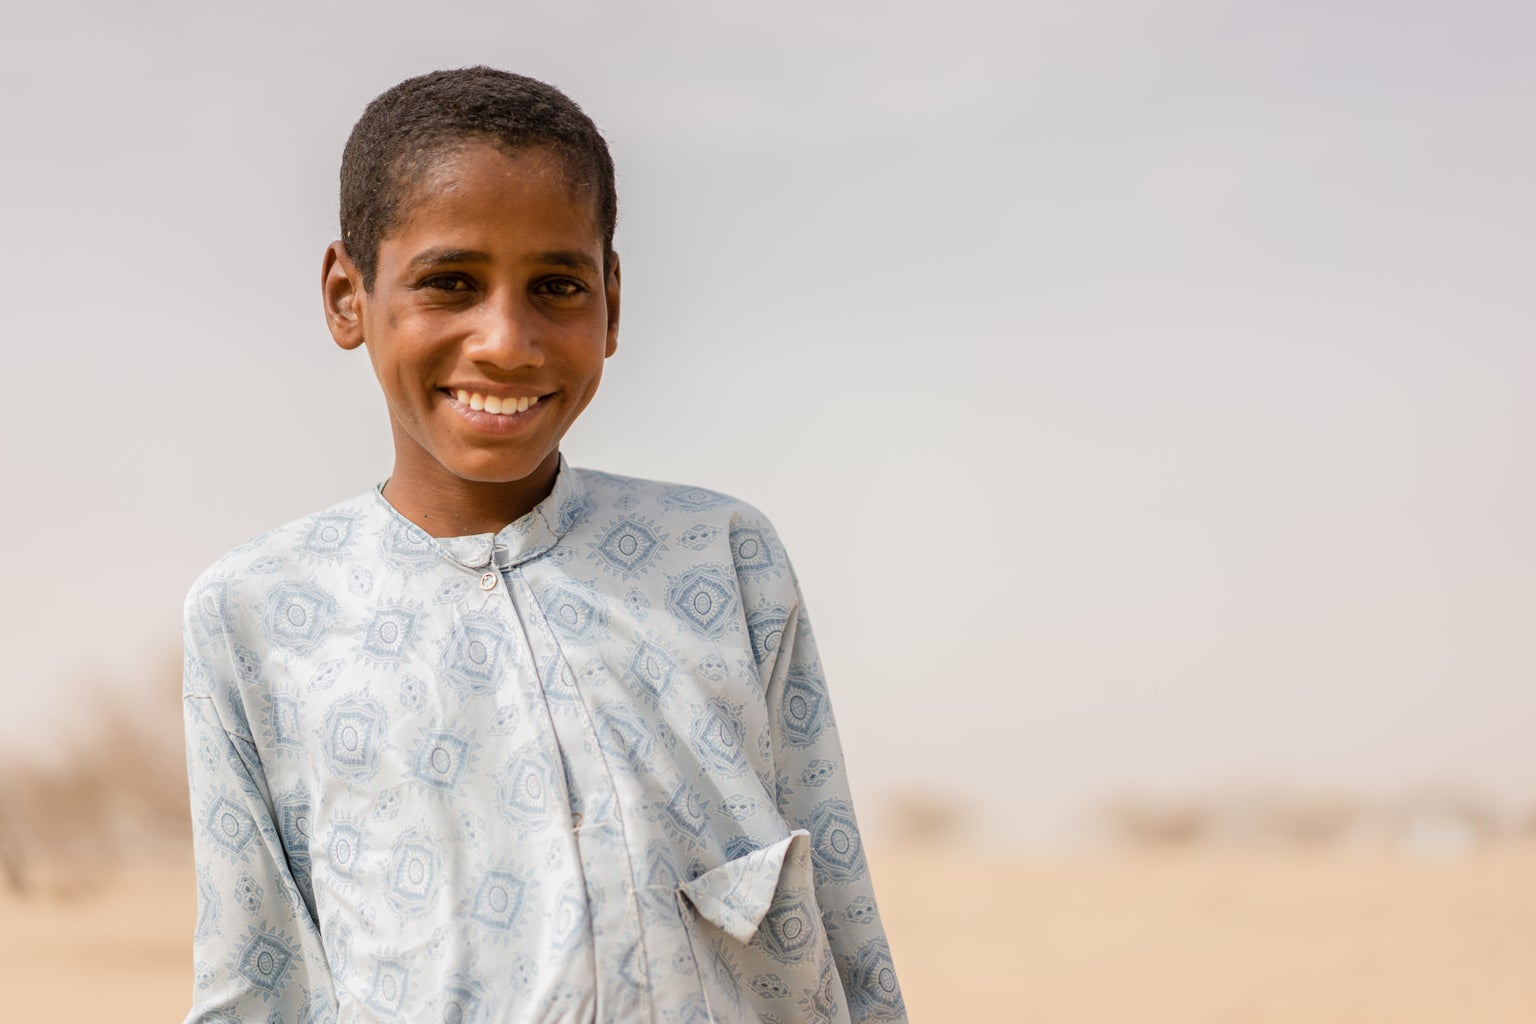 Ali Saleh, 12, returnee from Niger, lives with his family in Dar Naim site in Lake region, Chad.